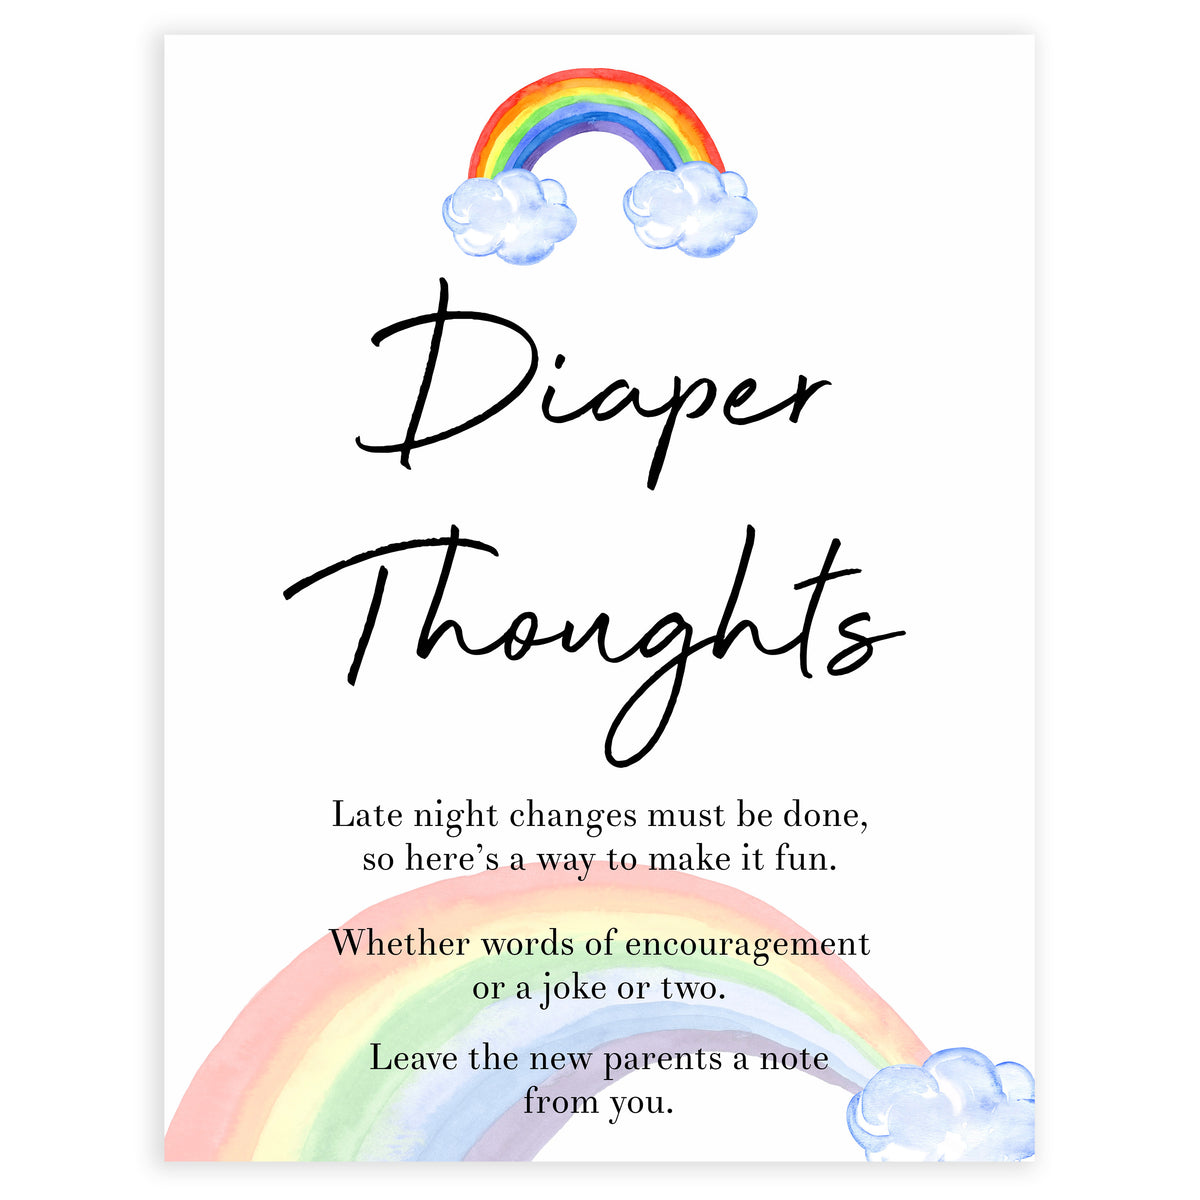 Rainbow baby games, rainbow diaper thoughts, rainbow printable baby games, instant download games, rainbow baby shower, printable baby games, fun baby games, popular baby games, top 10 baby games